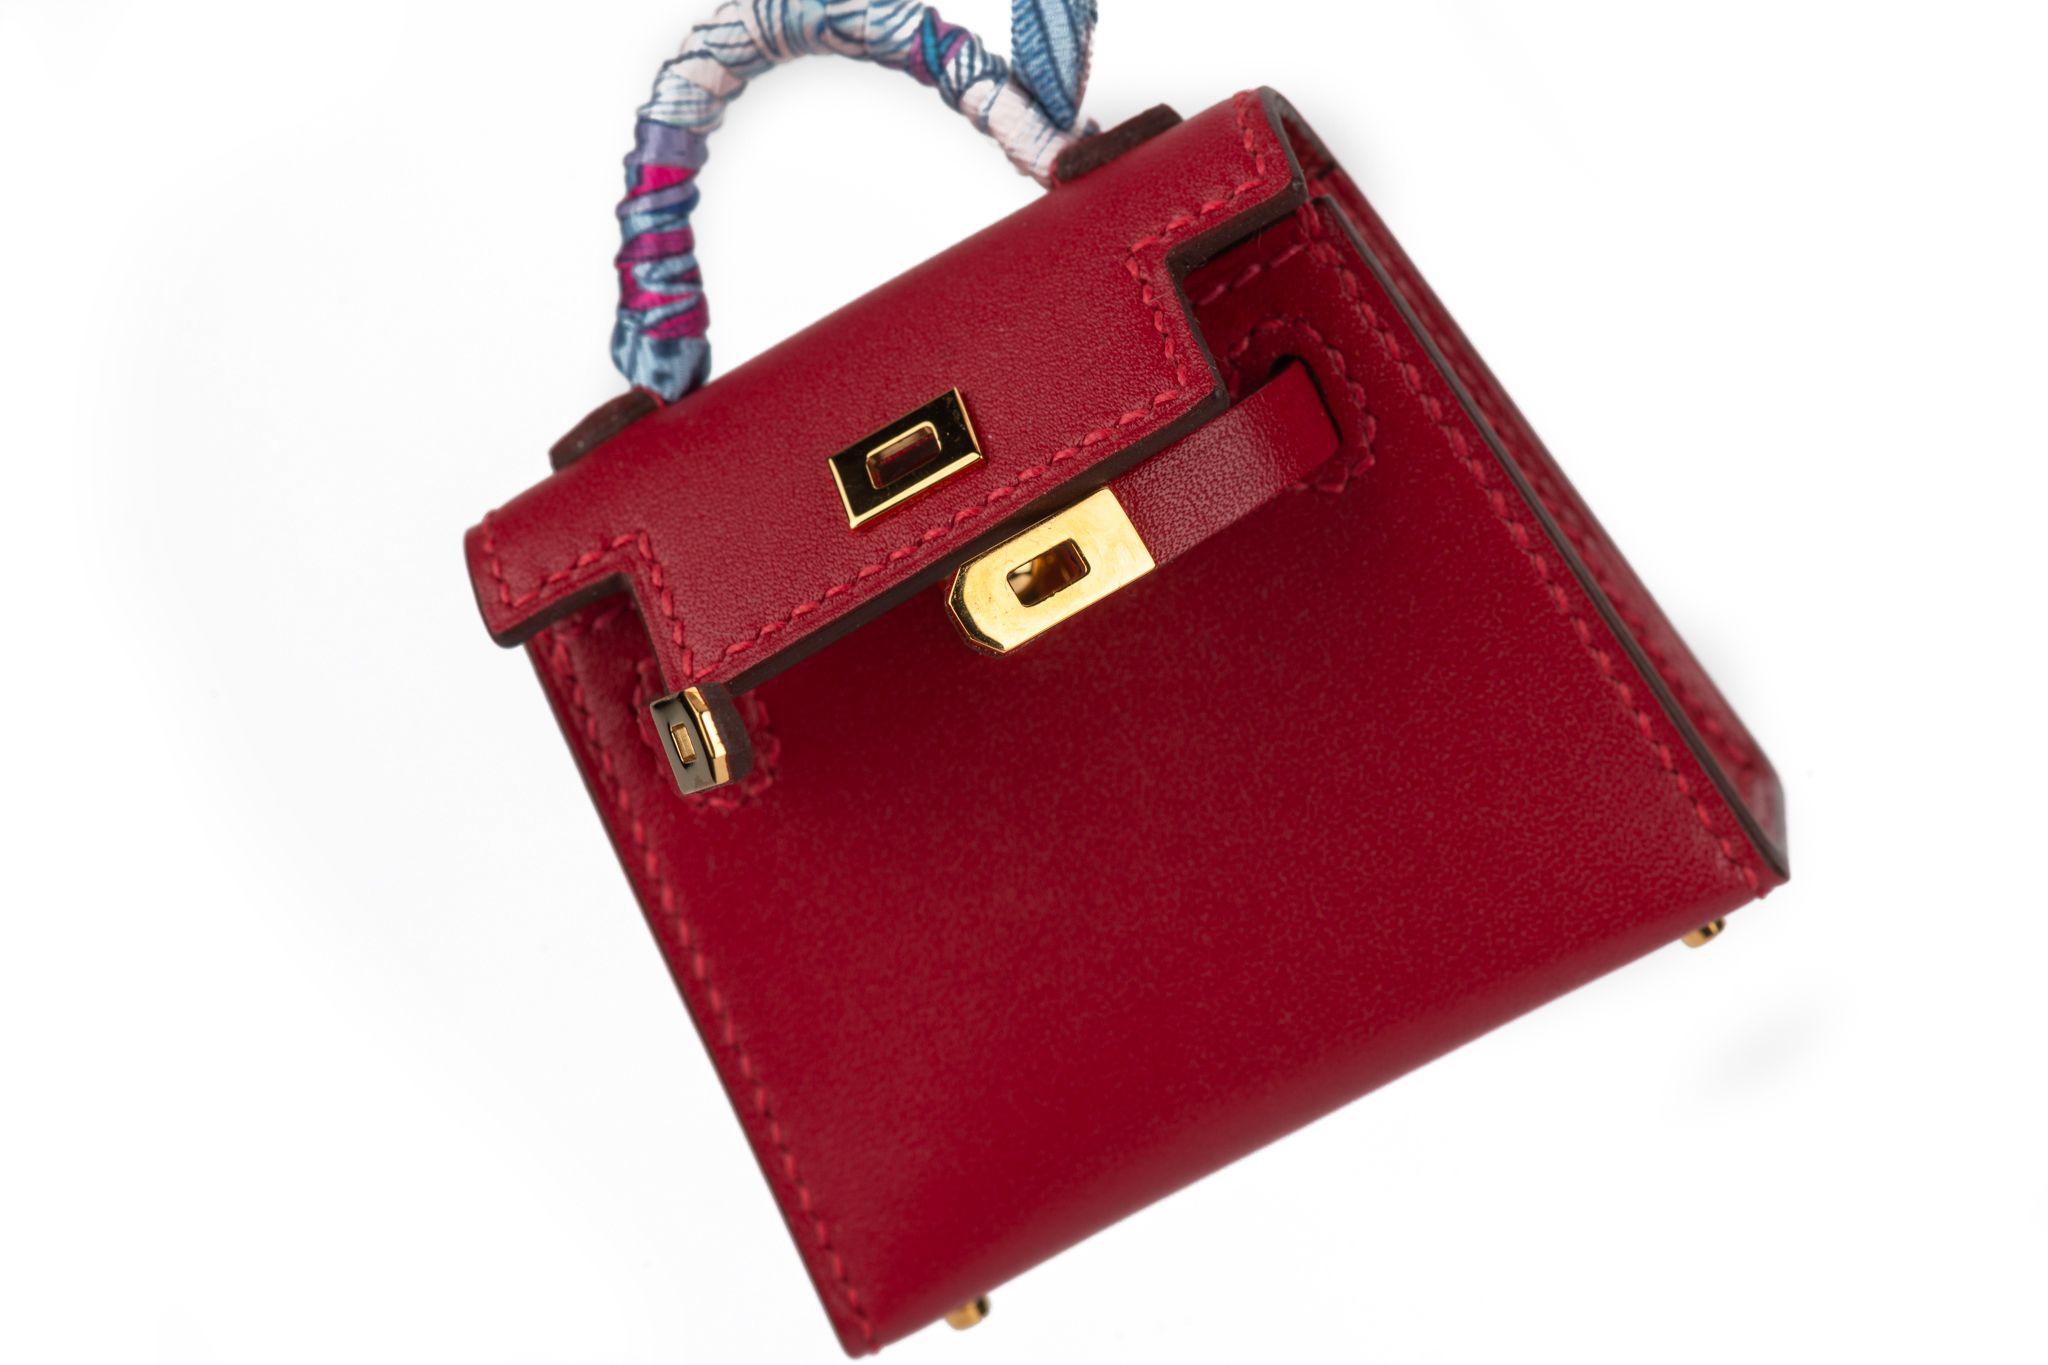 Hermès Mini Kelly Bag Charm Silk Strap In Excellent Condition For Sale In West Hollywood, CA